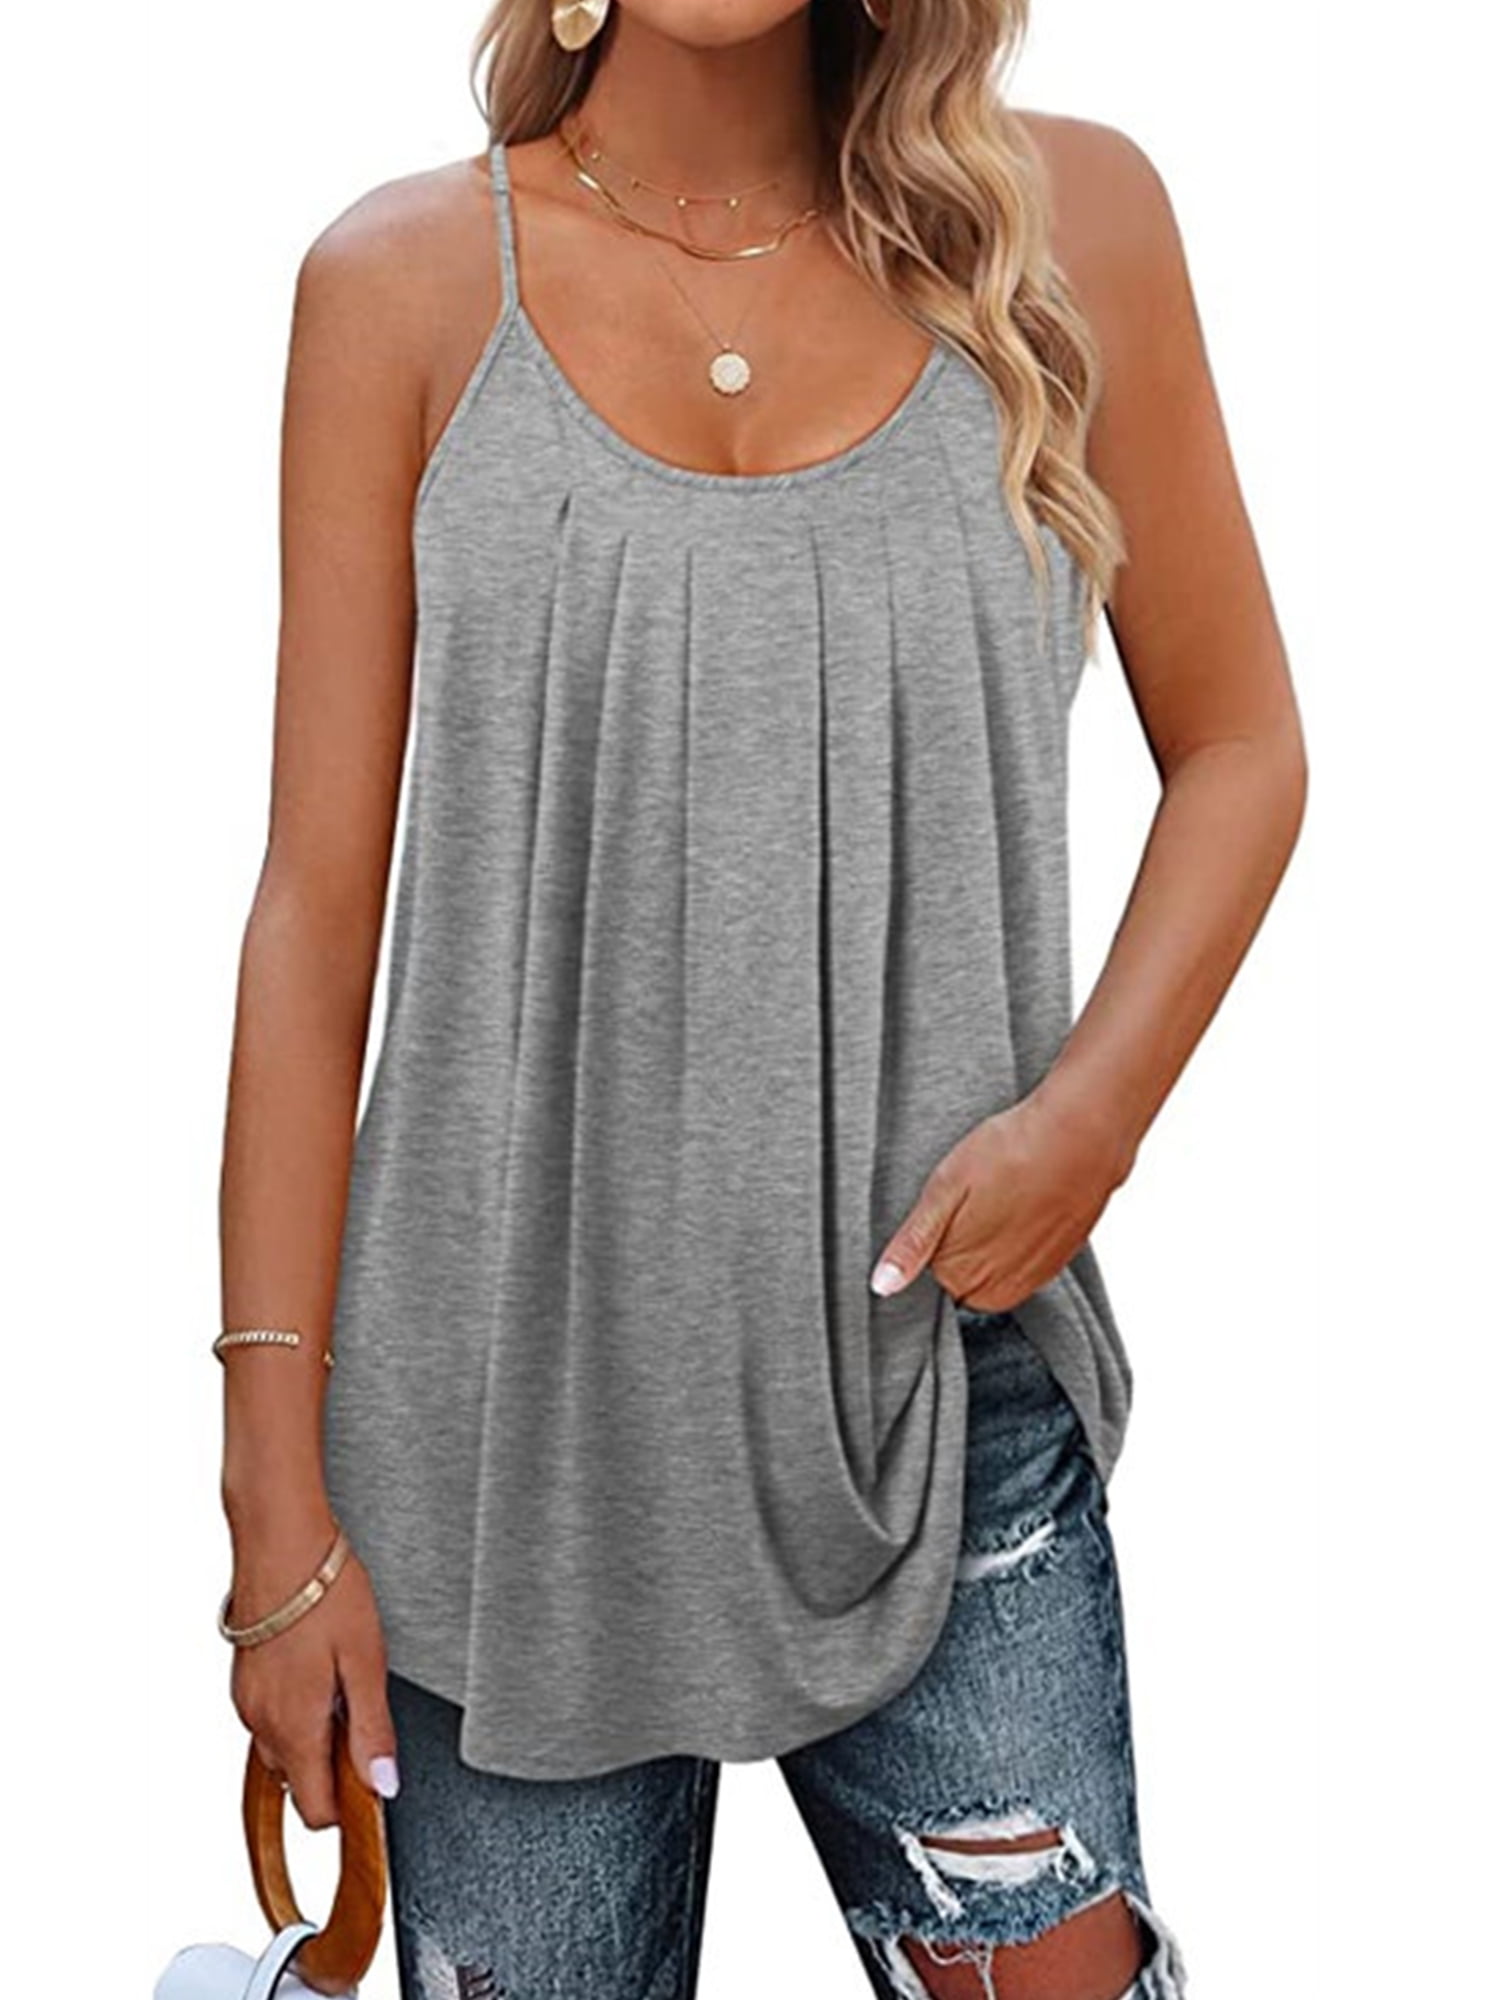 UVN Tank Tops for Women Pleat Spaghetti Strap Camisole Sleeveless Summer  Tops Loose Fit Beach Tank Ladies Casual Tank Top